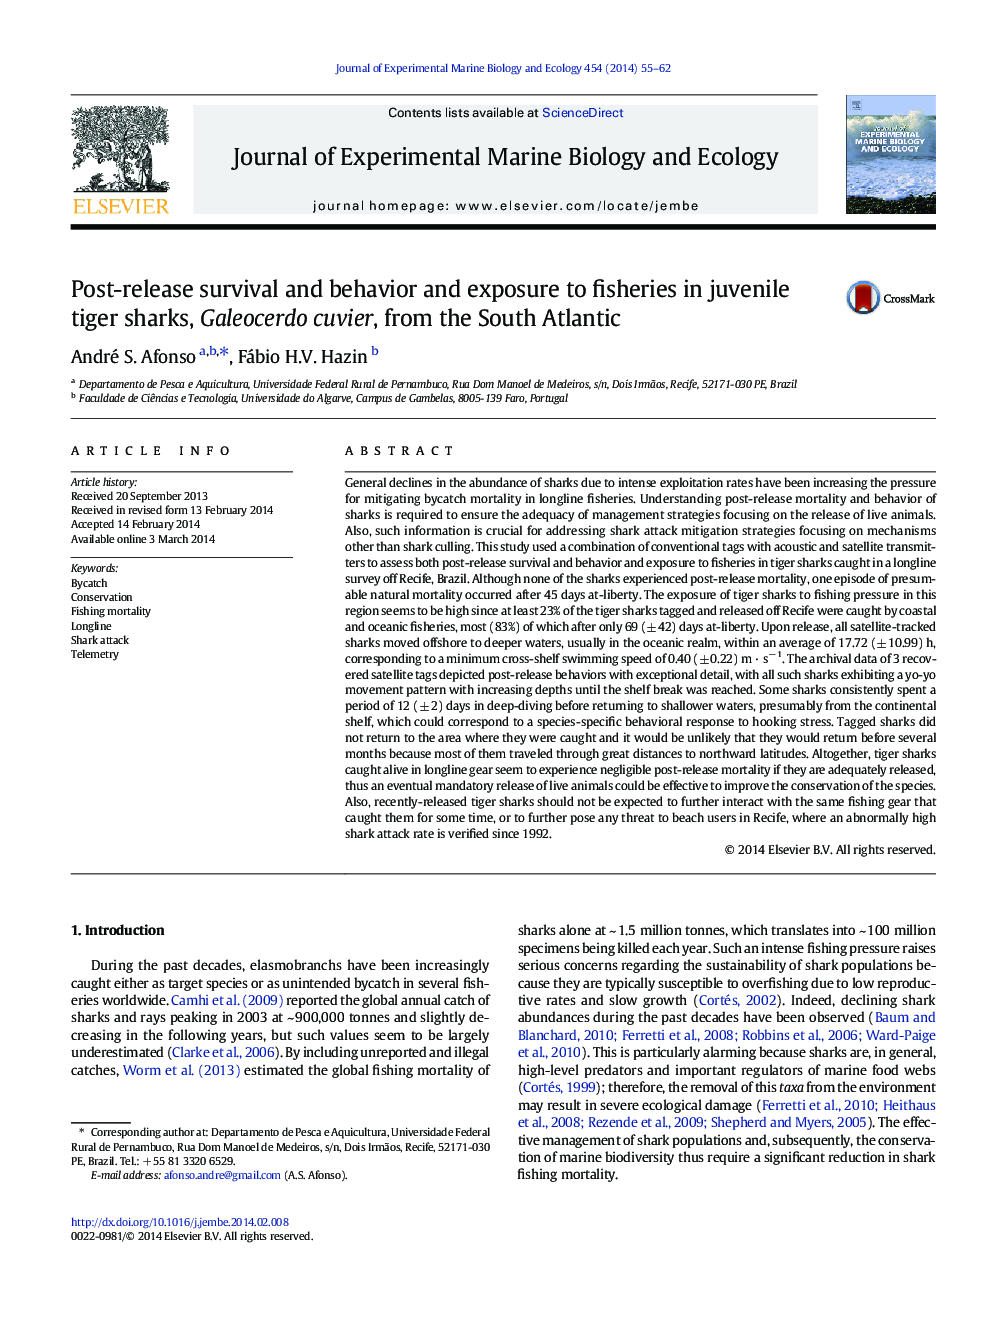 Post-release survival and behavior and exposure to fisheries in juvenile tiger sharks, Galeocerdo cuvier, from the South Atlantic